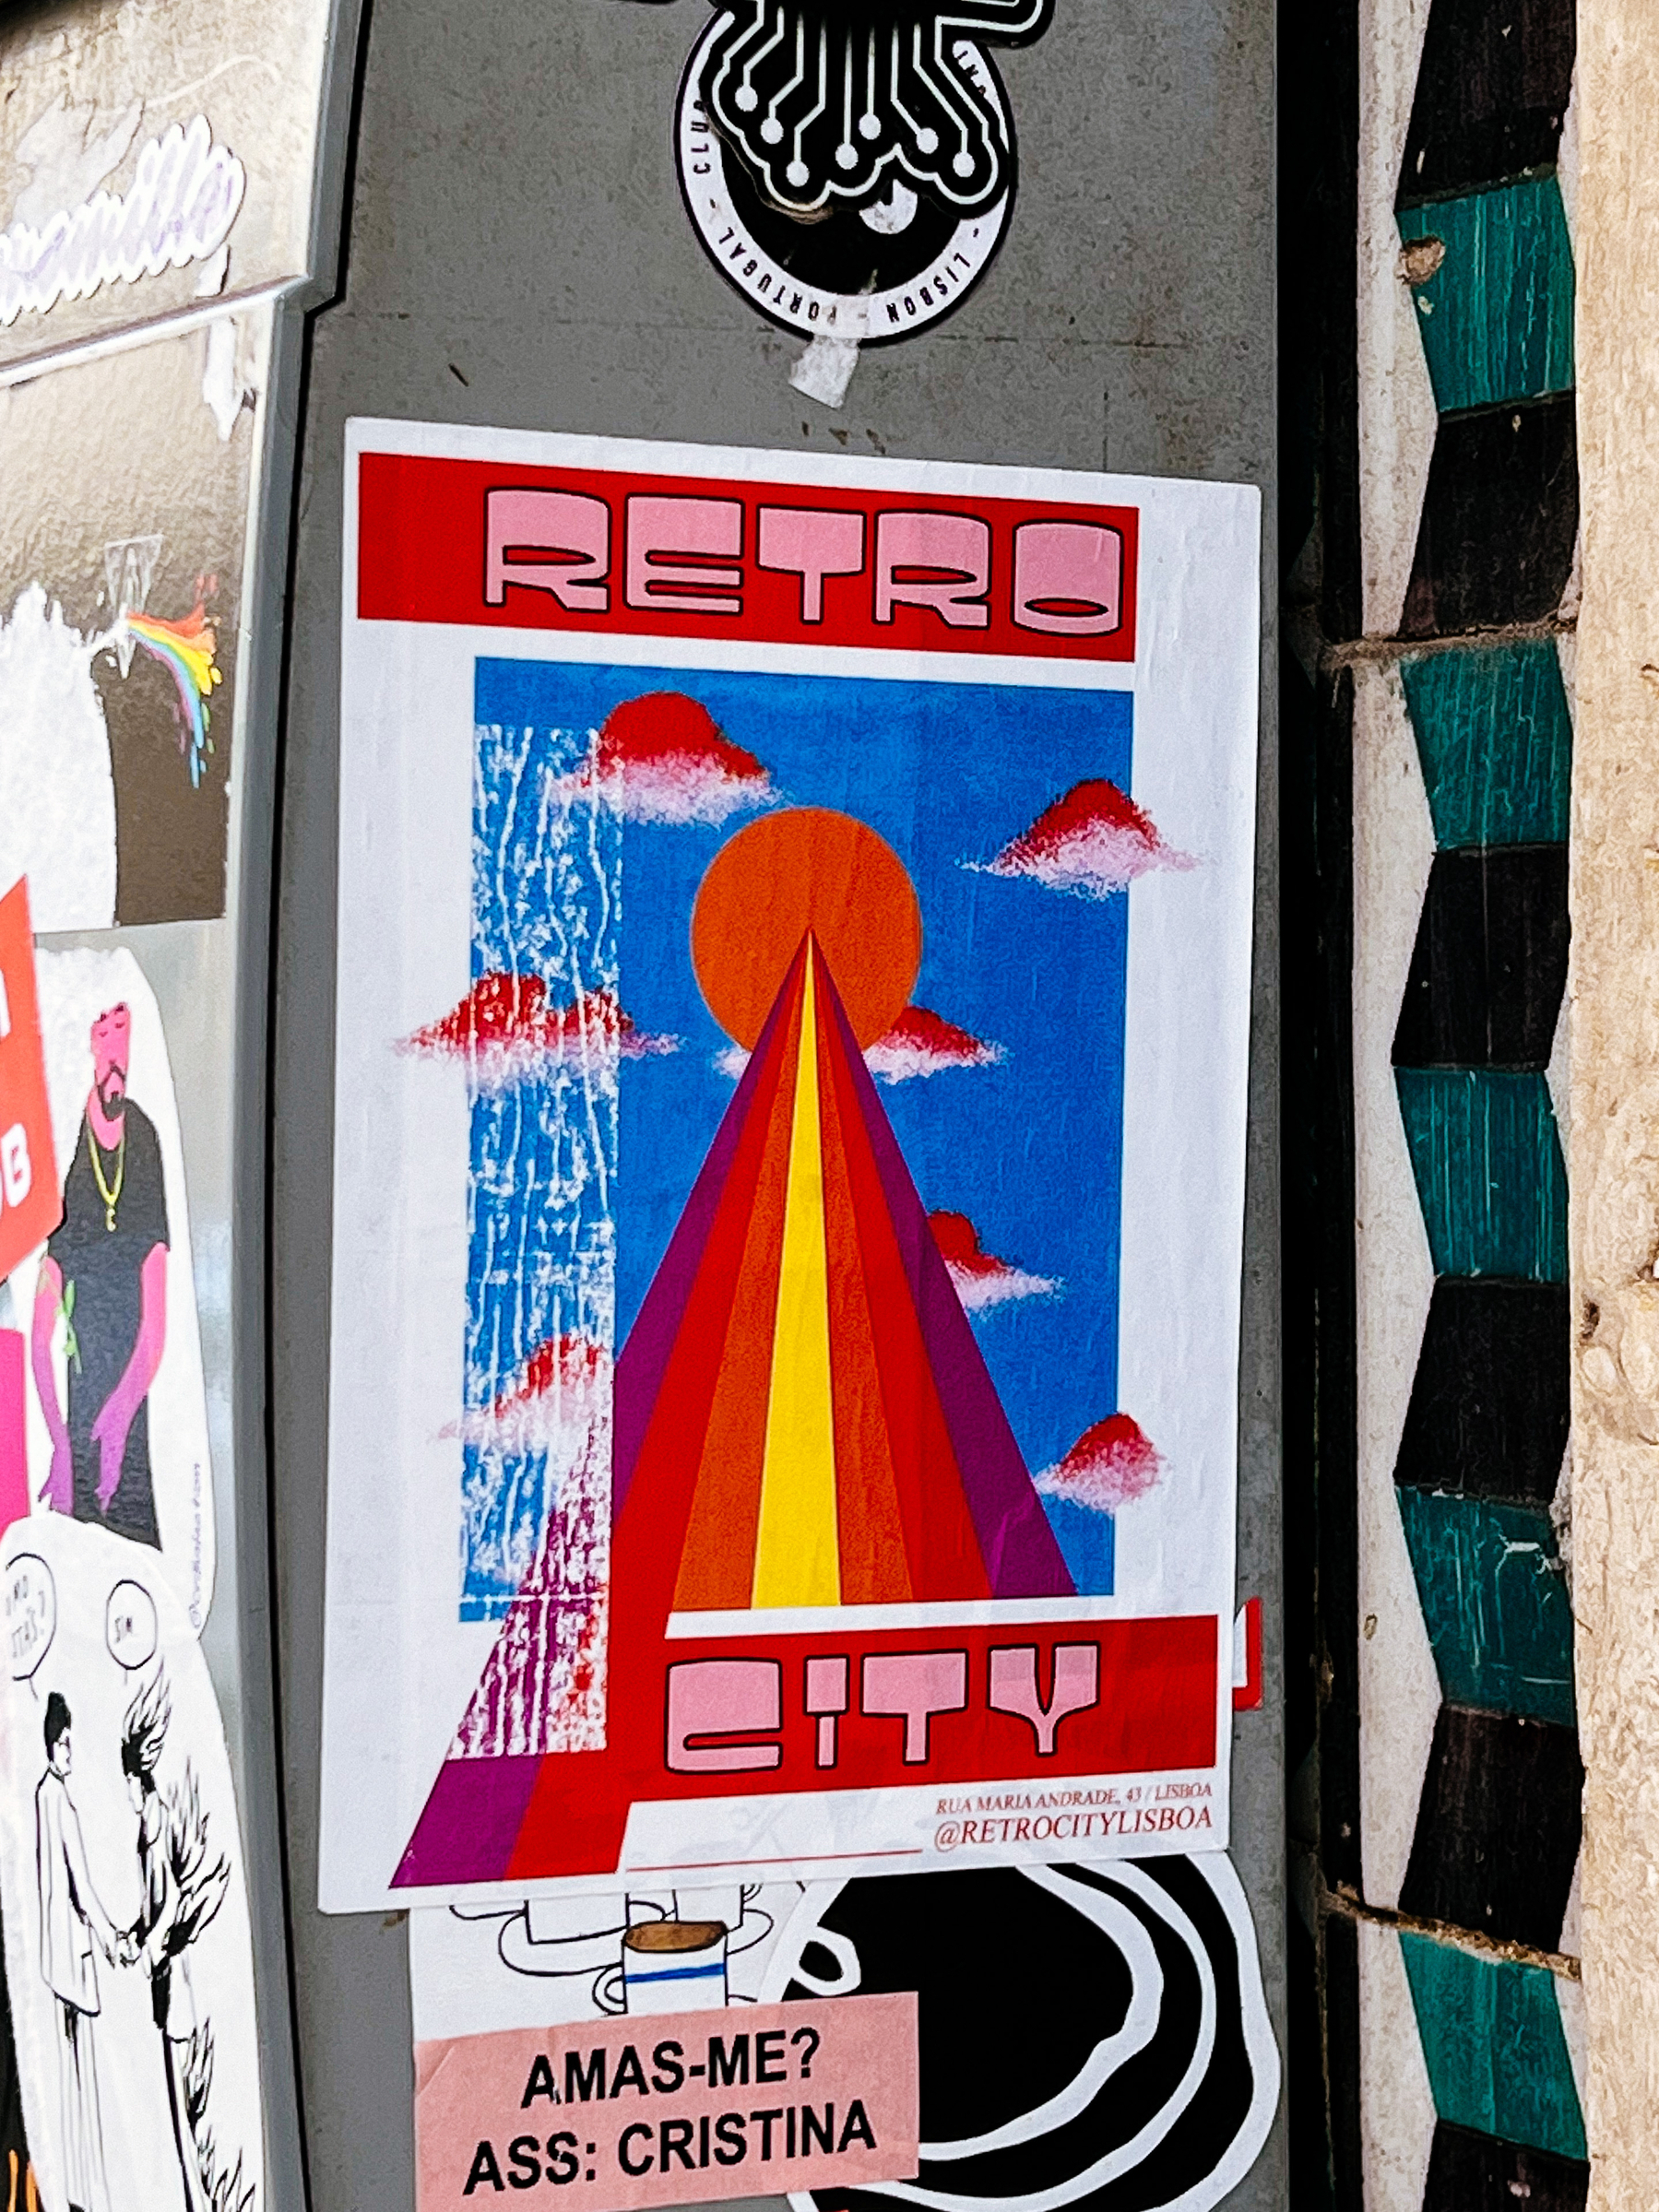 Sticker with the words “Retro City”, on a retro font, and a red/orange/yellow “road” leading to a red sun.